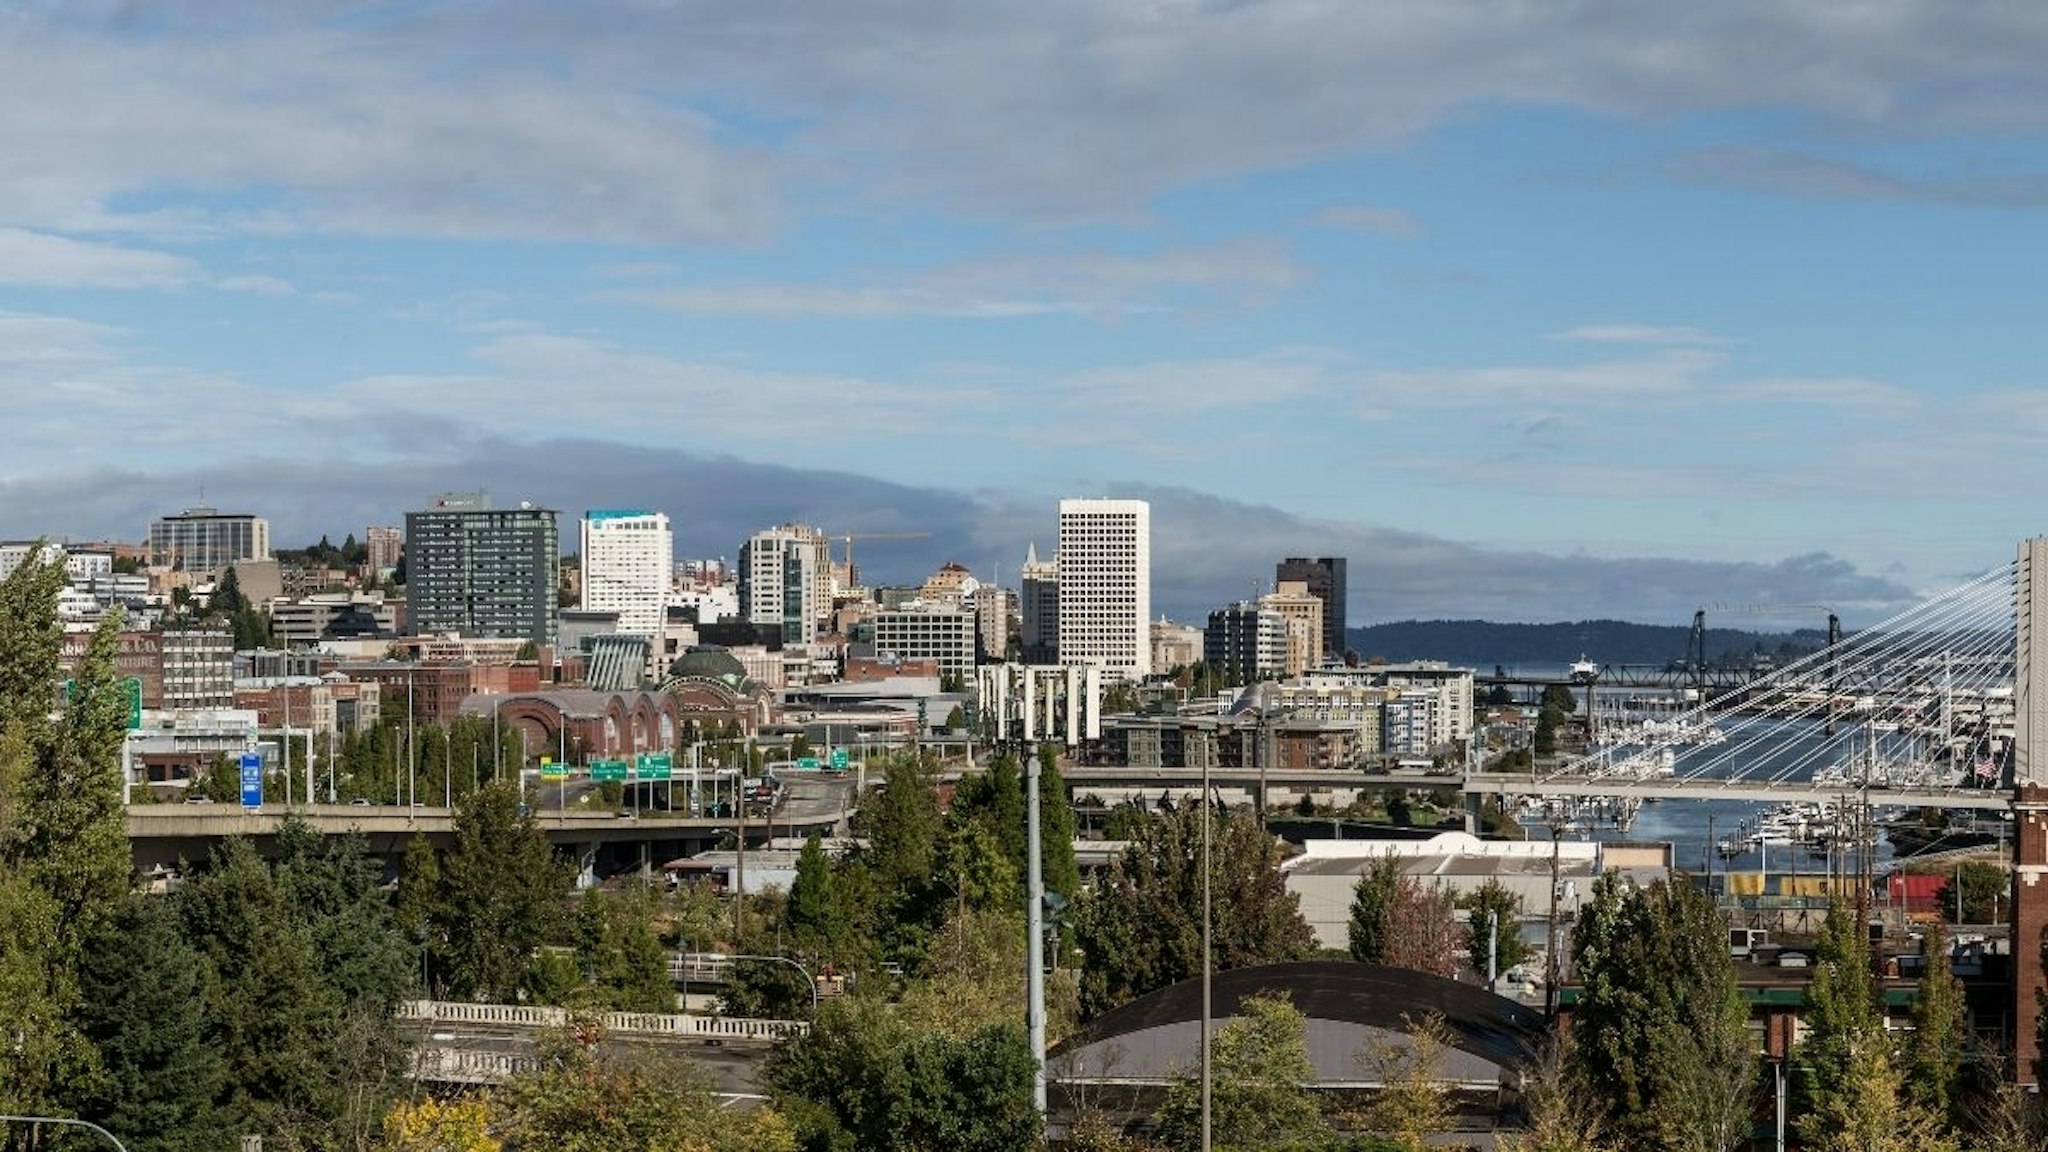 The downtown and Port is viewed from the LeMay-America's Car Museum on September 21, 2021, in Tacoma, Washington.